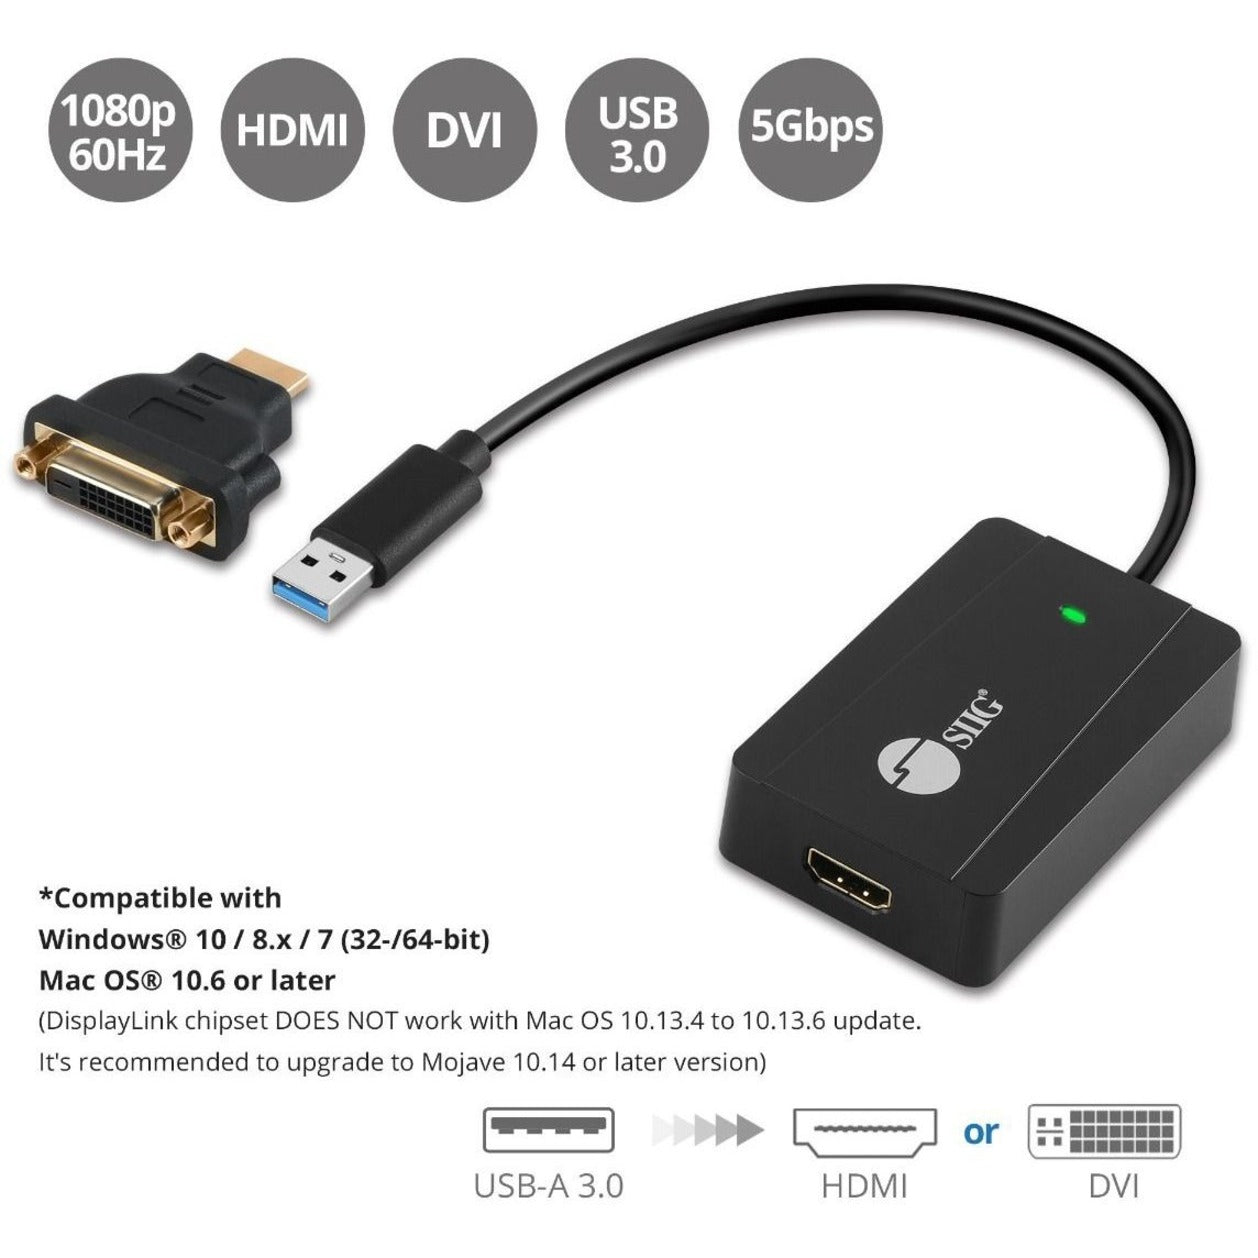 SIIG JU-H30H11-S1 USB 3.0 to HDMI/DVI Video Adapter Pro, Supports 2560 x 1440 Resolution